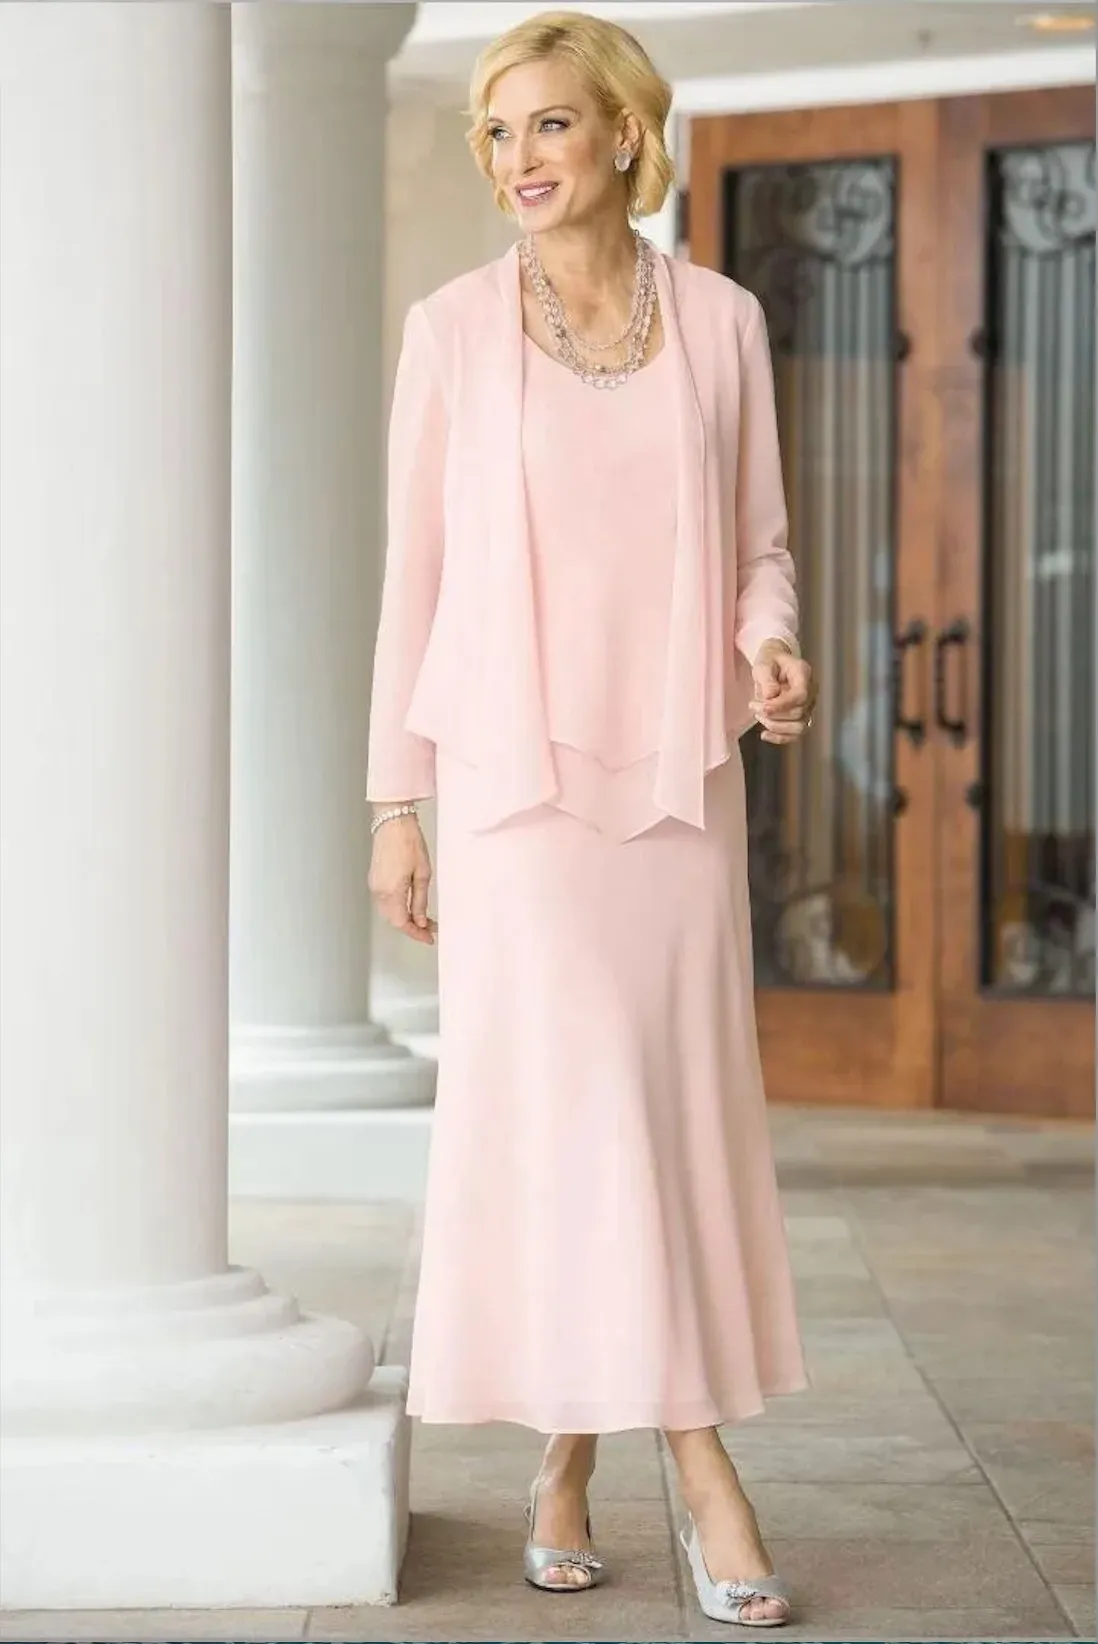 Blush Pink Sheath Mother Of The Bride Dresses With Long Sleeves Jacket Three Pieces Chiffon Ankle Length Women Formal Party Groom Mother's Dress For Wedding